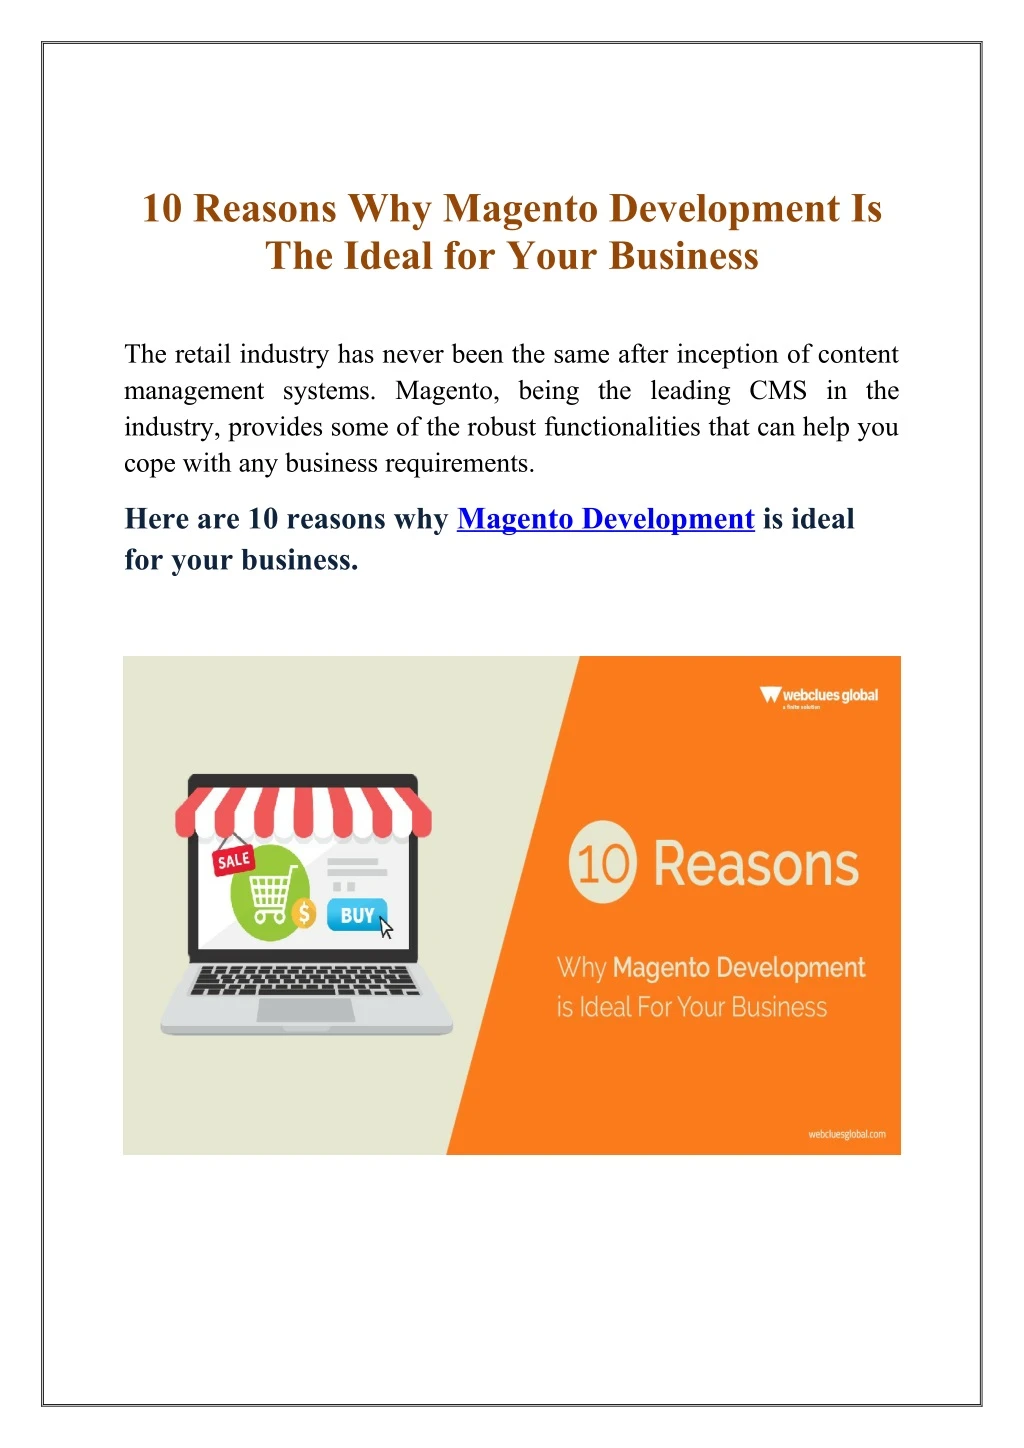 10 reasons why magento development is the ideal